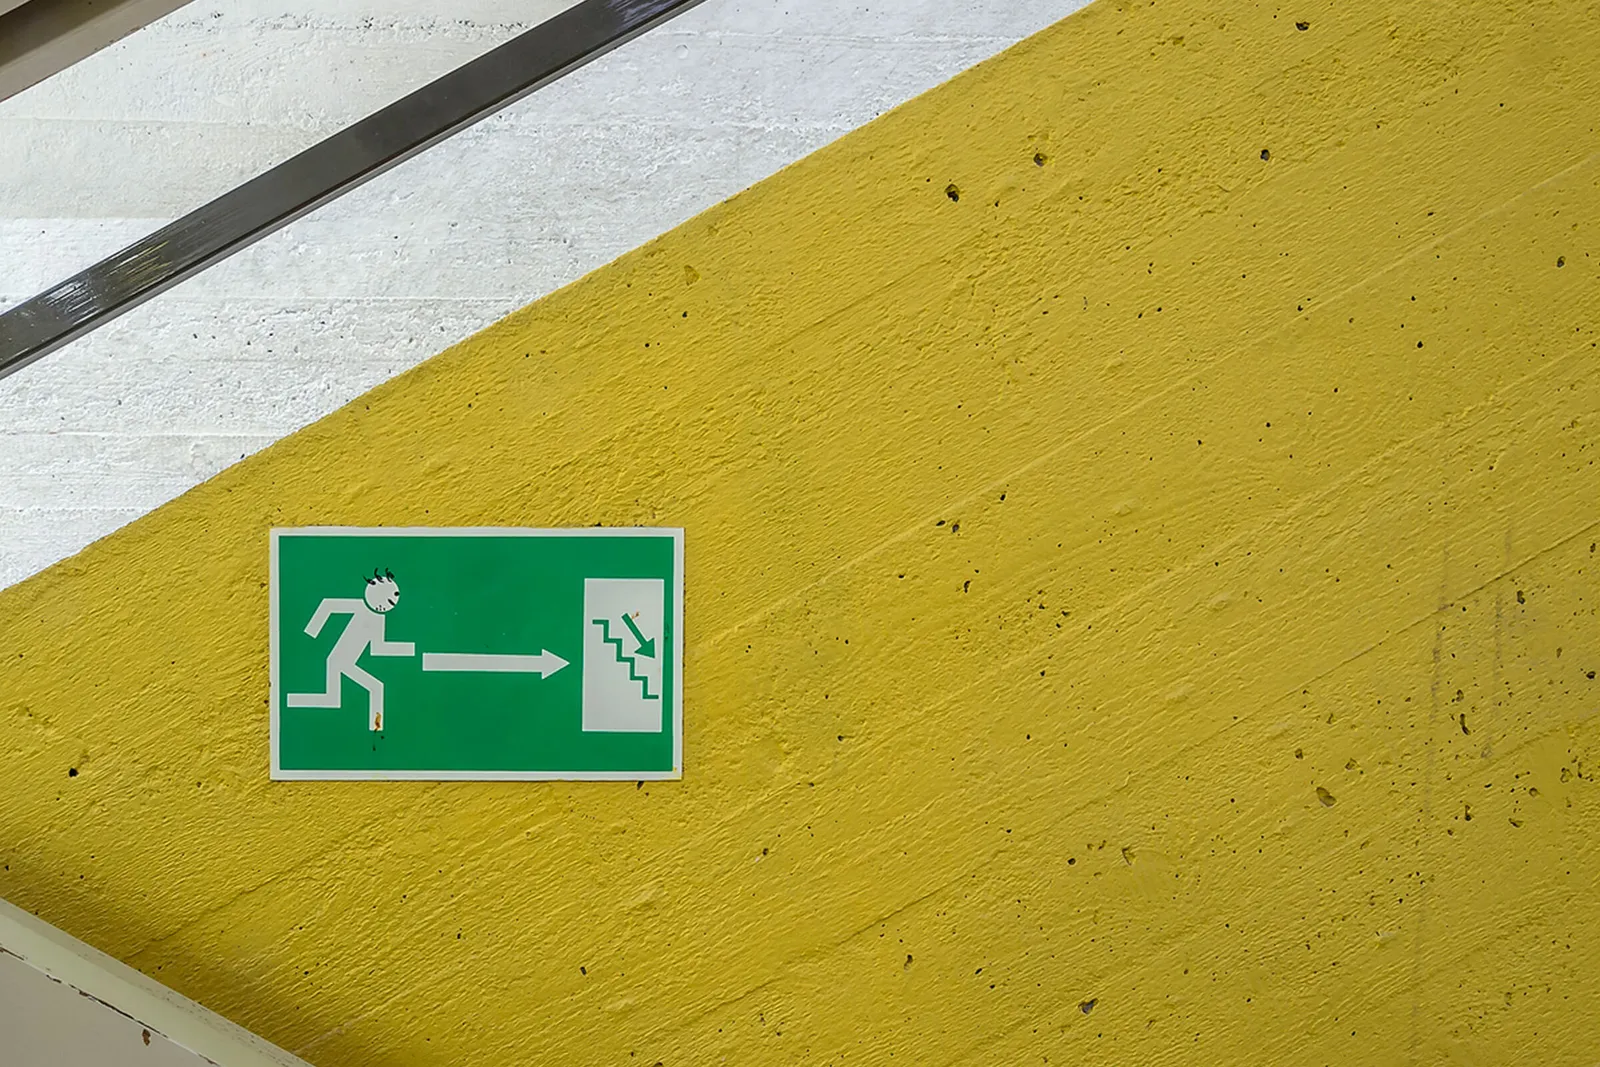 Stark shapes with yellow and white stripes and an exit sign